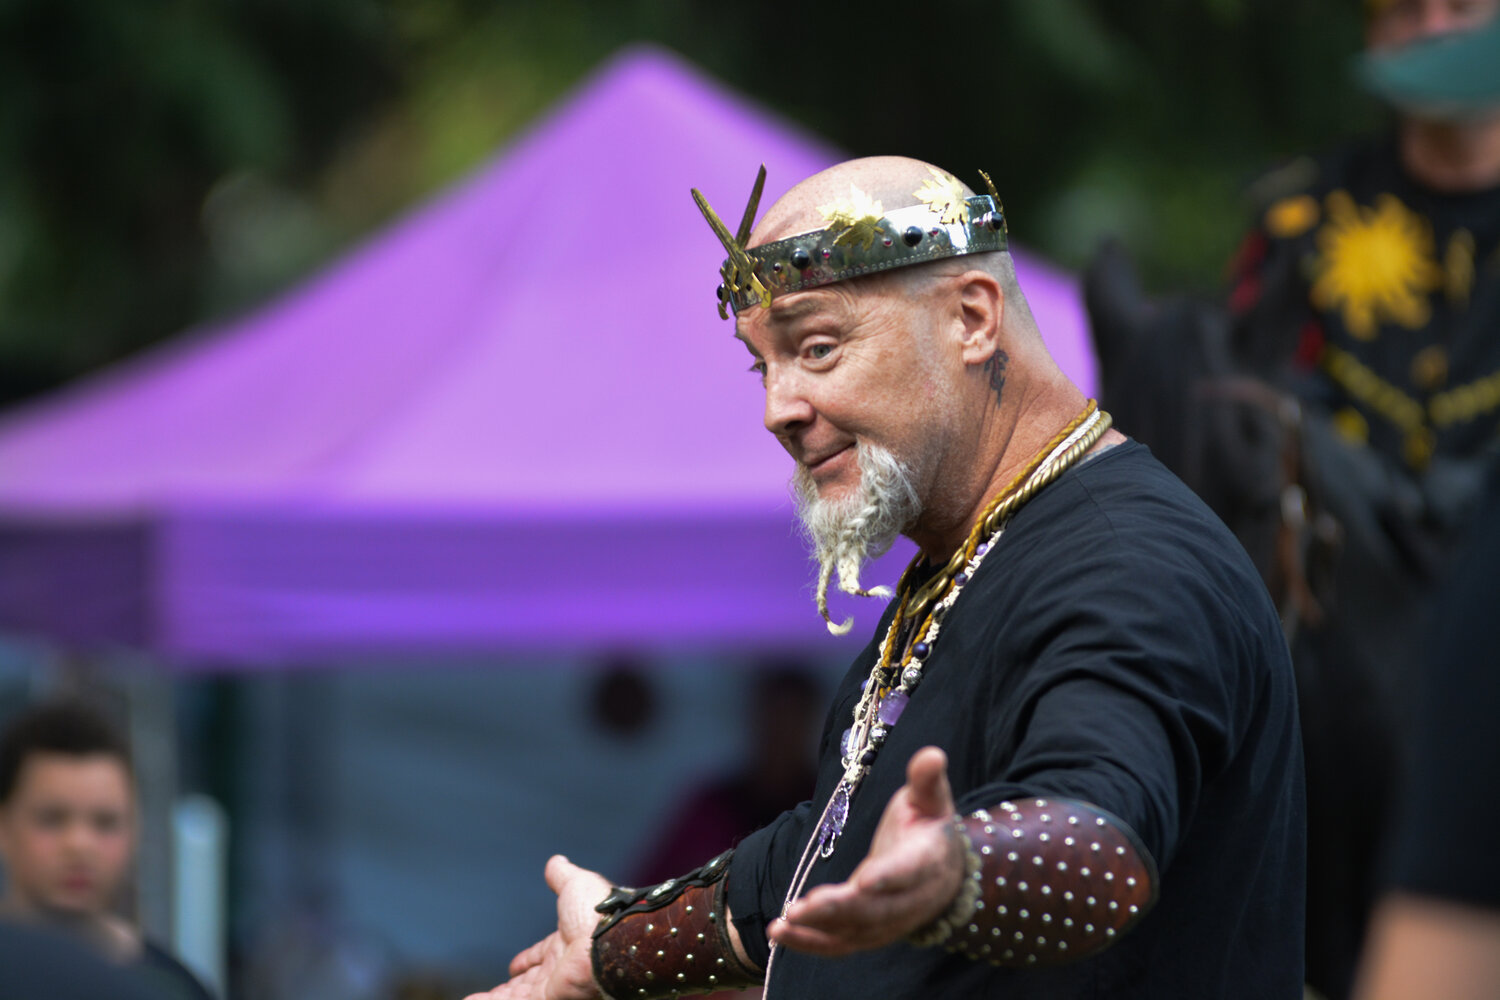 Captain Bill Koutrouba shrugs and smiles in a conversation at the Norse West Viking Festival on Sept. 10.